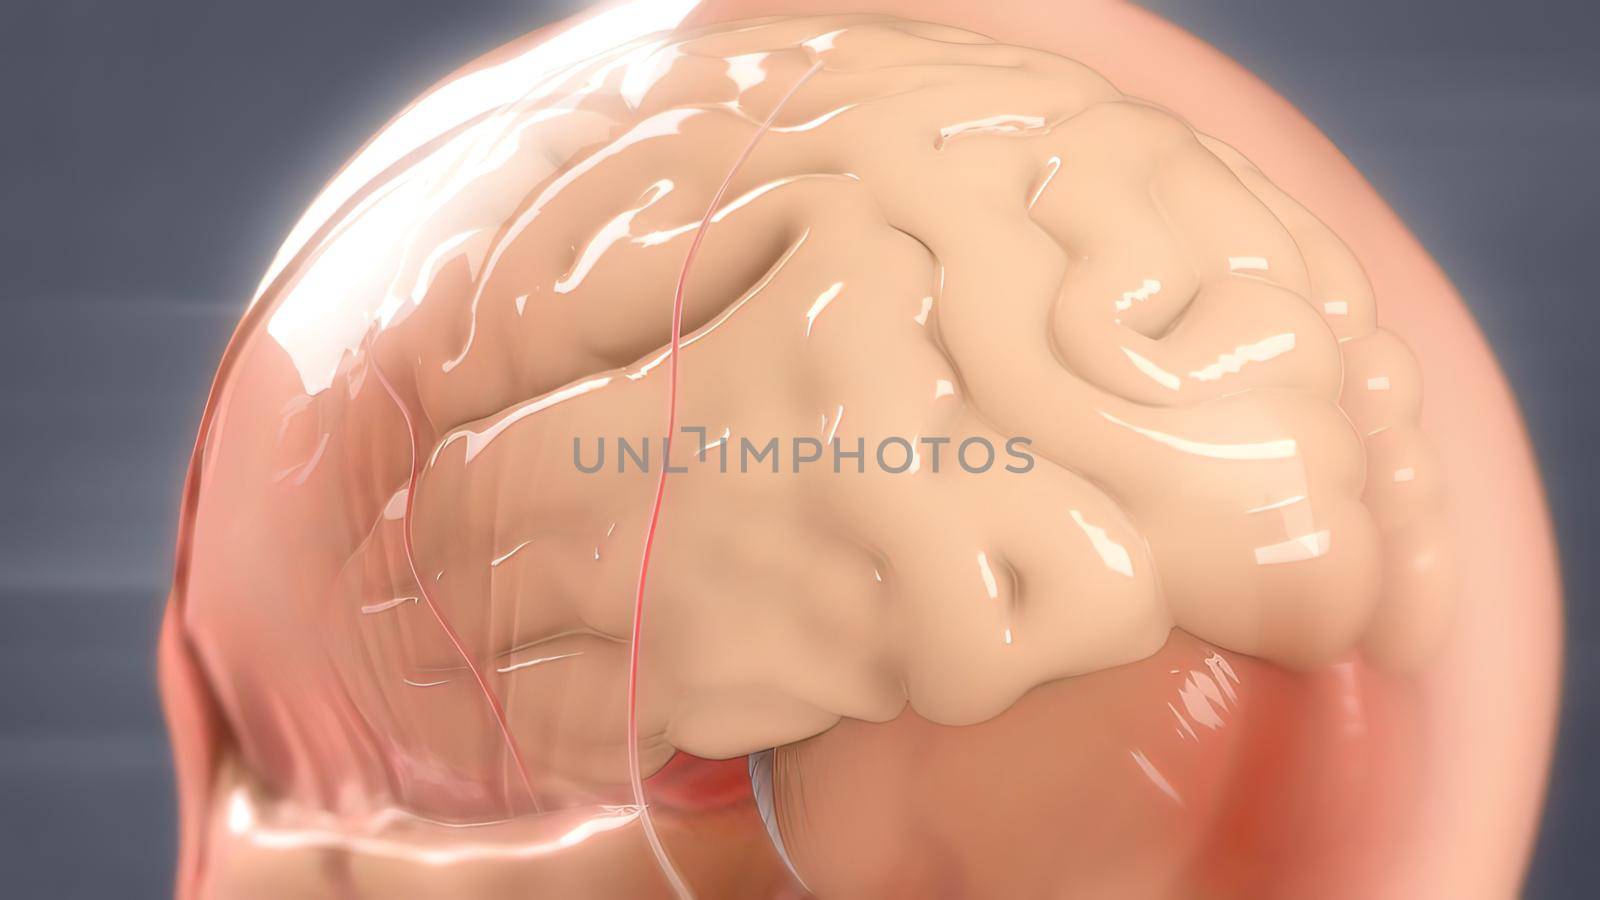 Human brain Anatomical Model 3D by creativepic